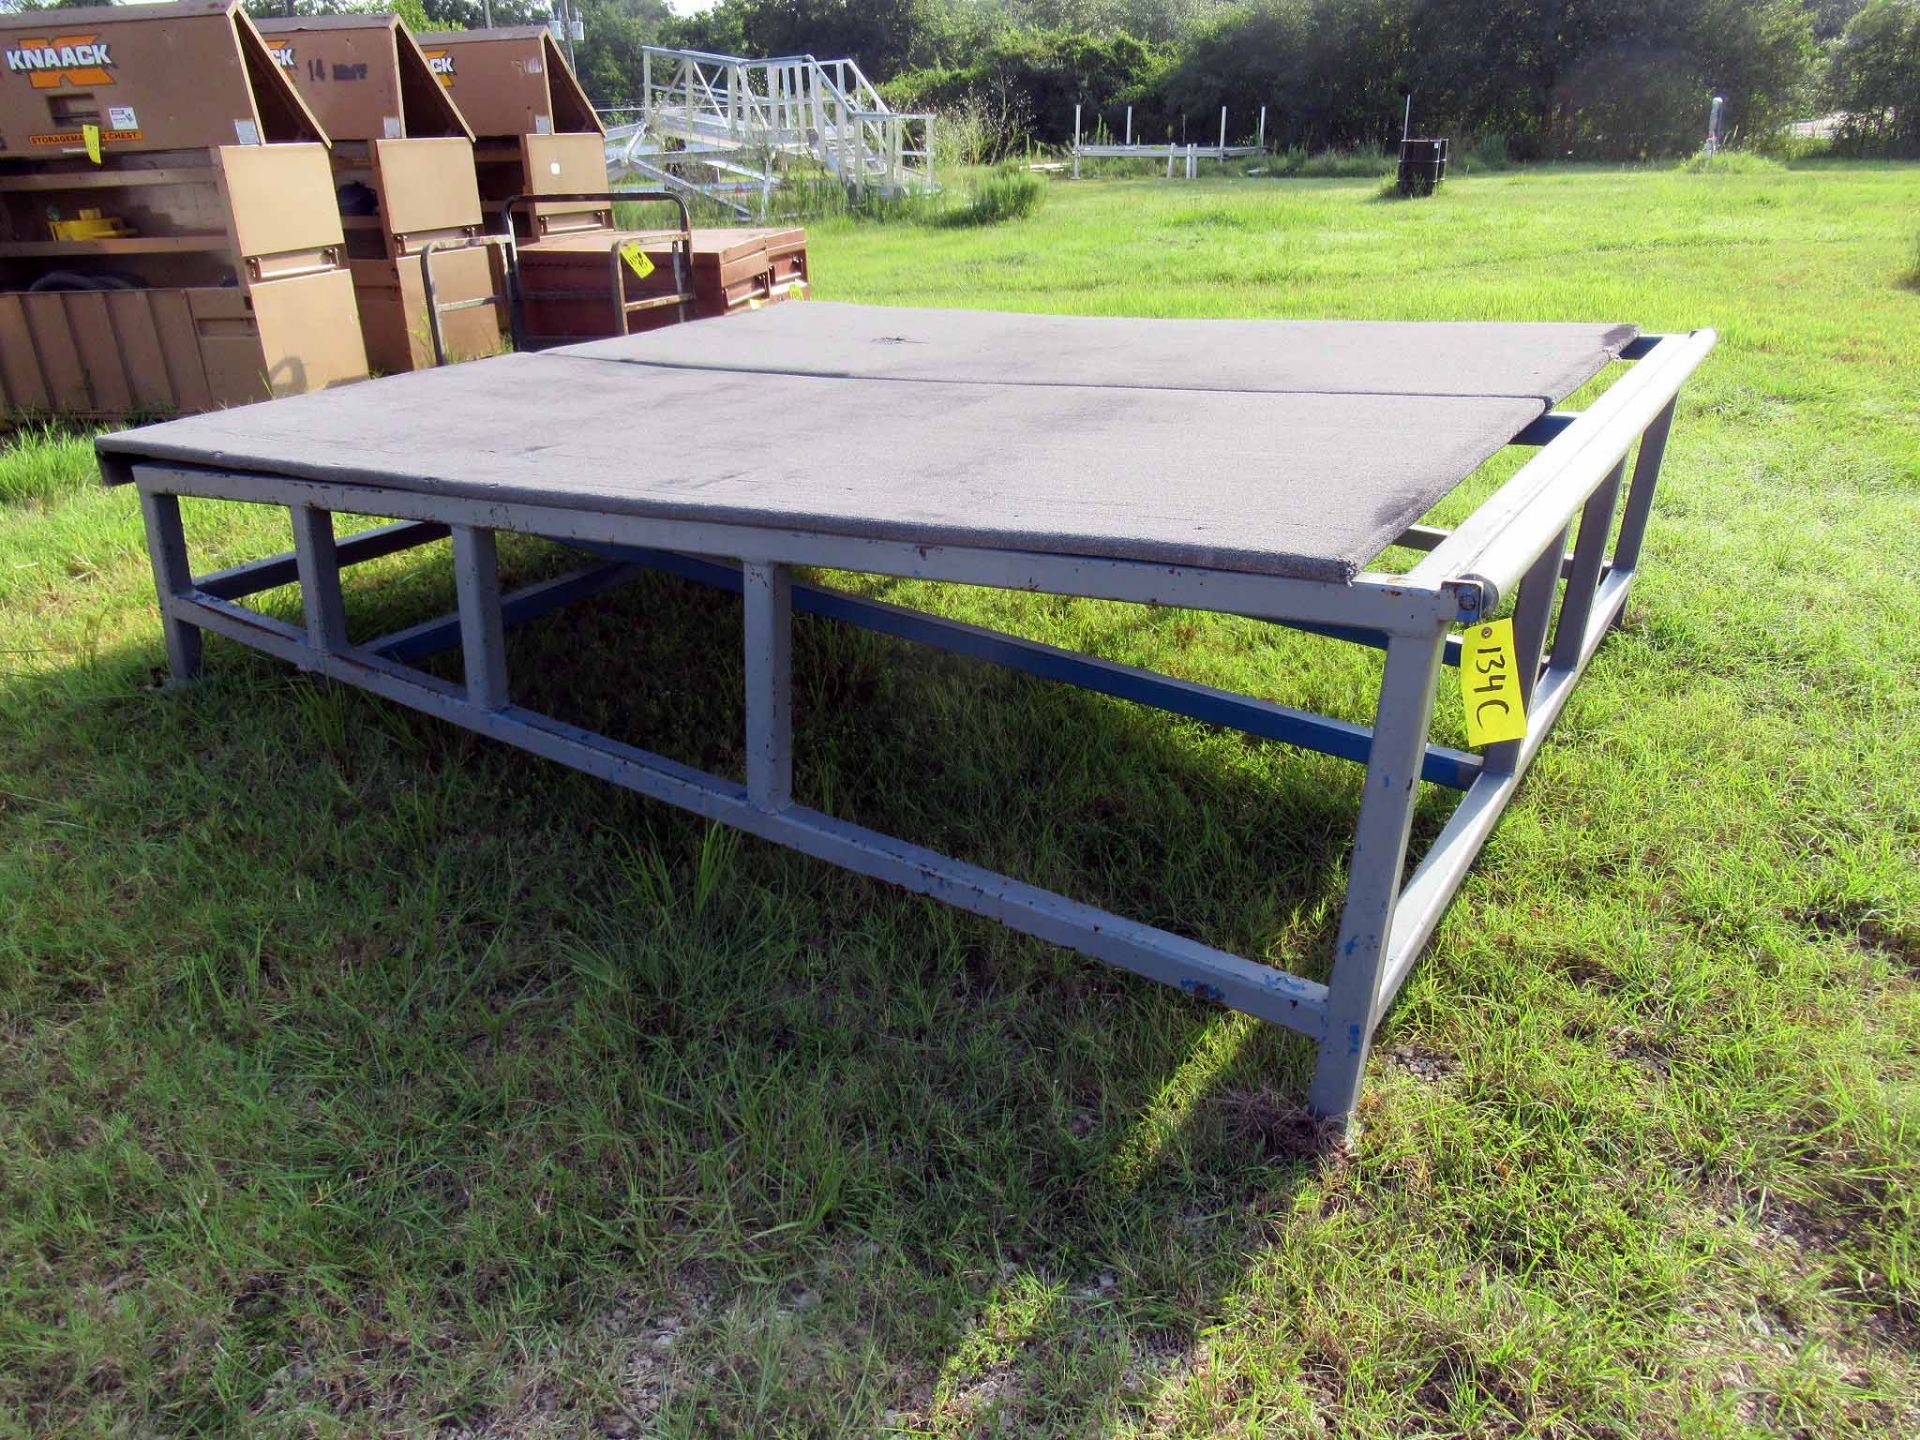 ANGLED SHEETING TABLE, Approx. 10' x 10', gravity fed with roller (Location 2: HMT, LLC, 23832